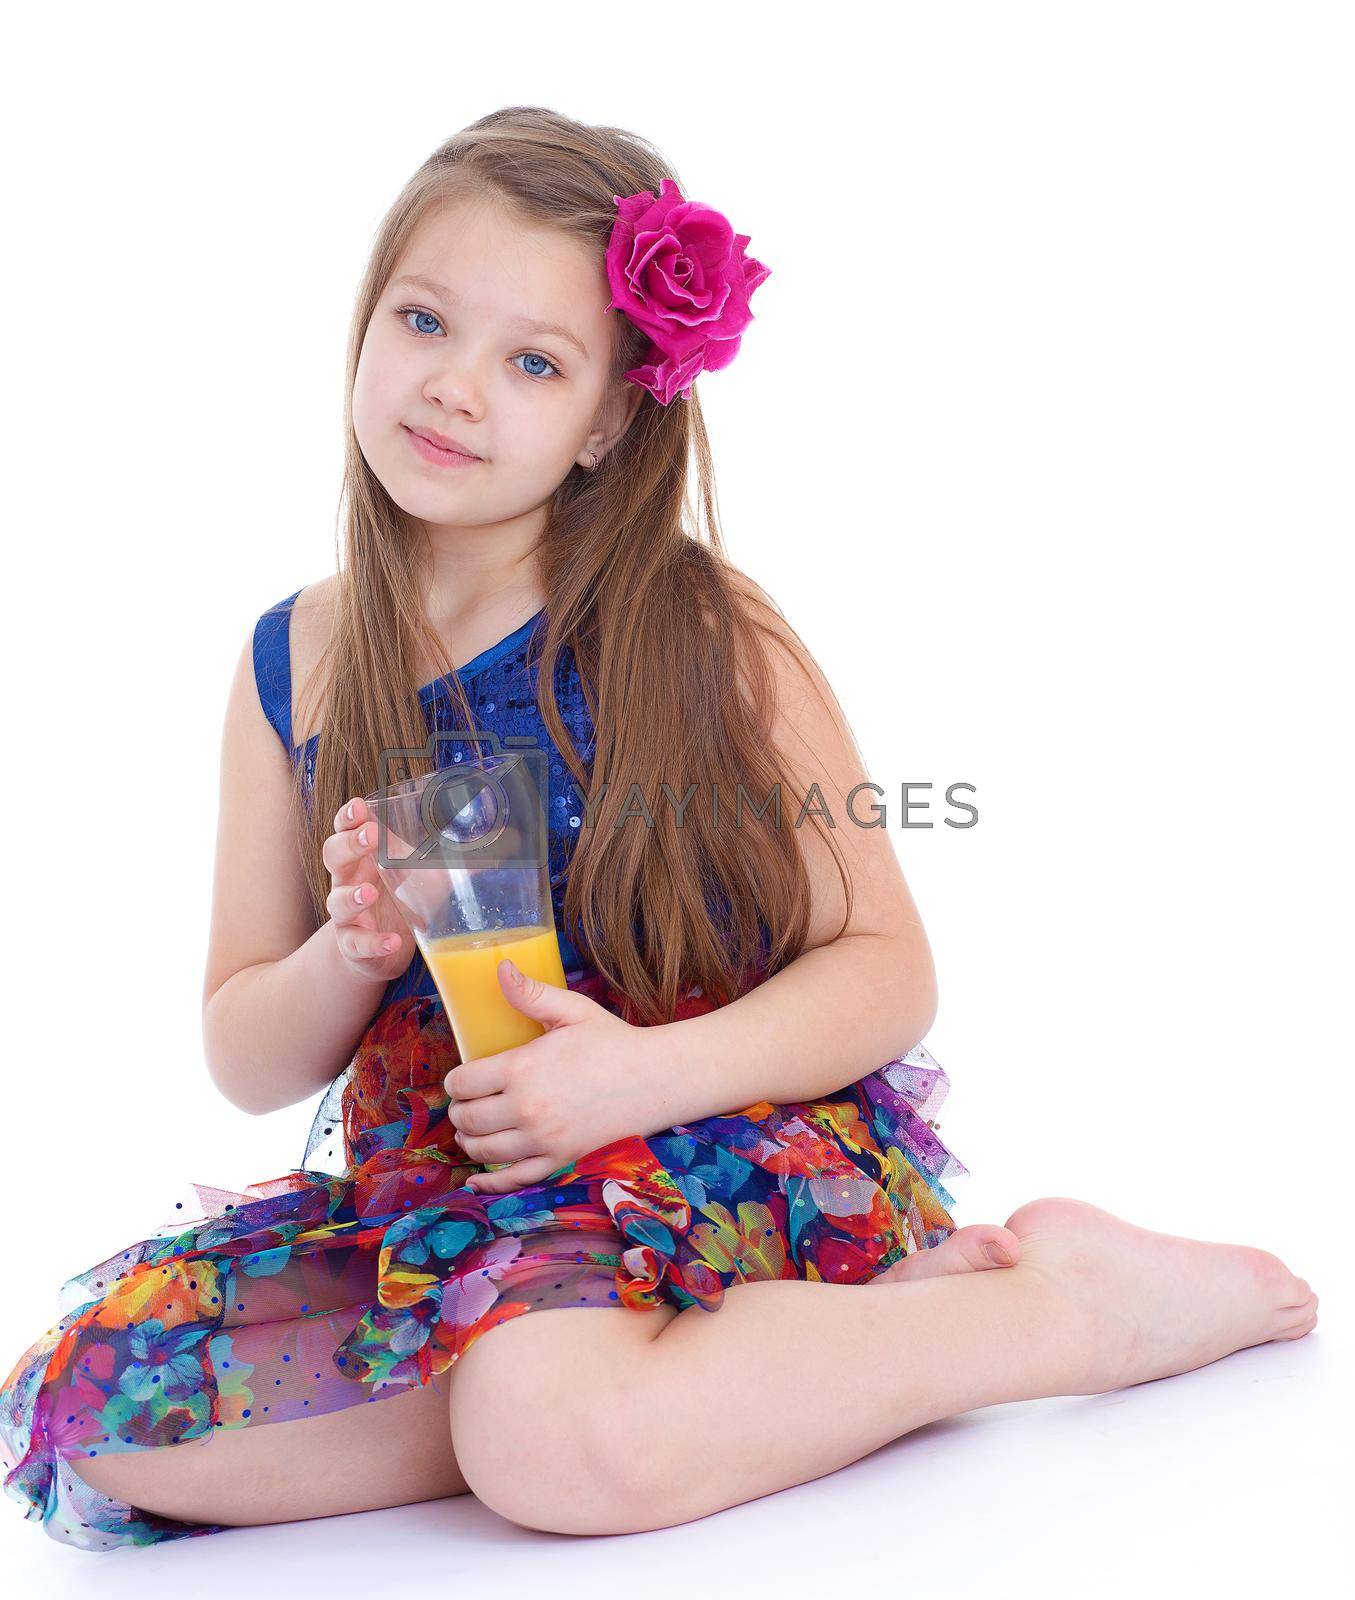 girl, fashion, rose in her hair and orange juice in a glass- Portrait of happy little girl drinking orange juice